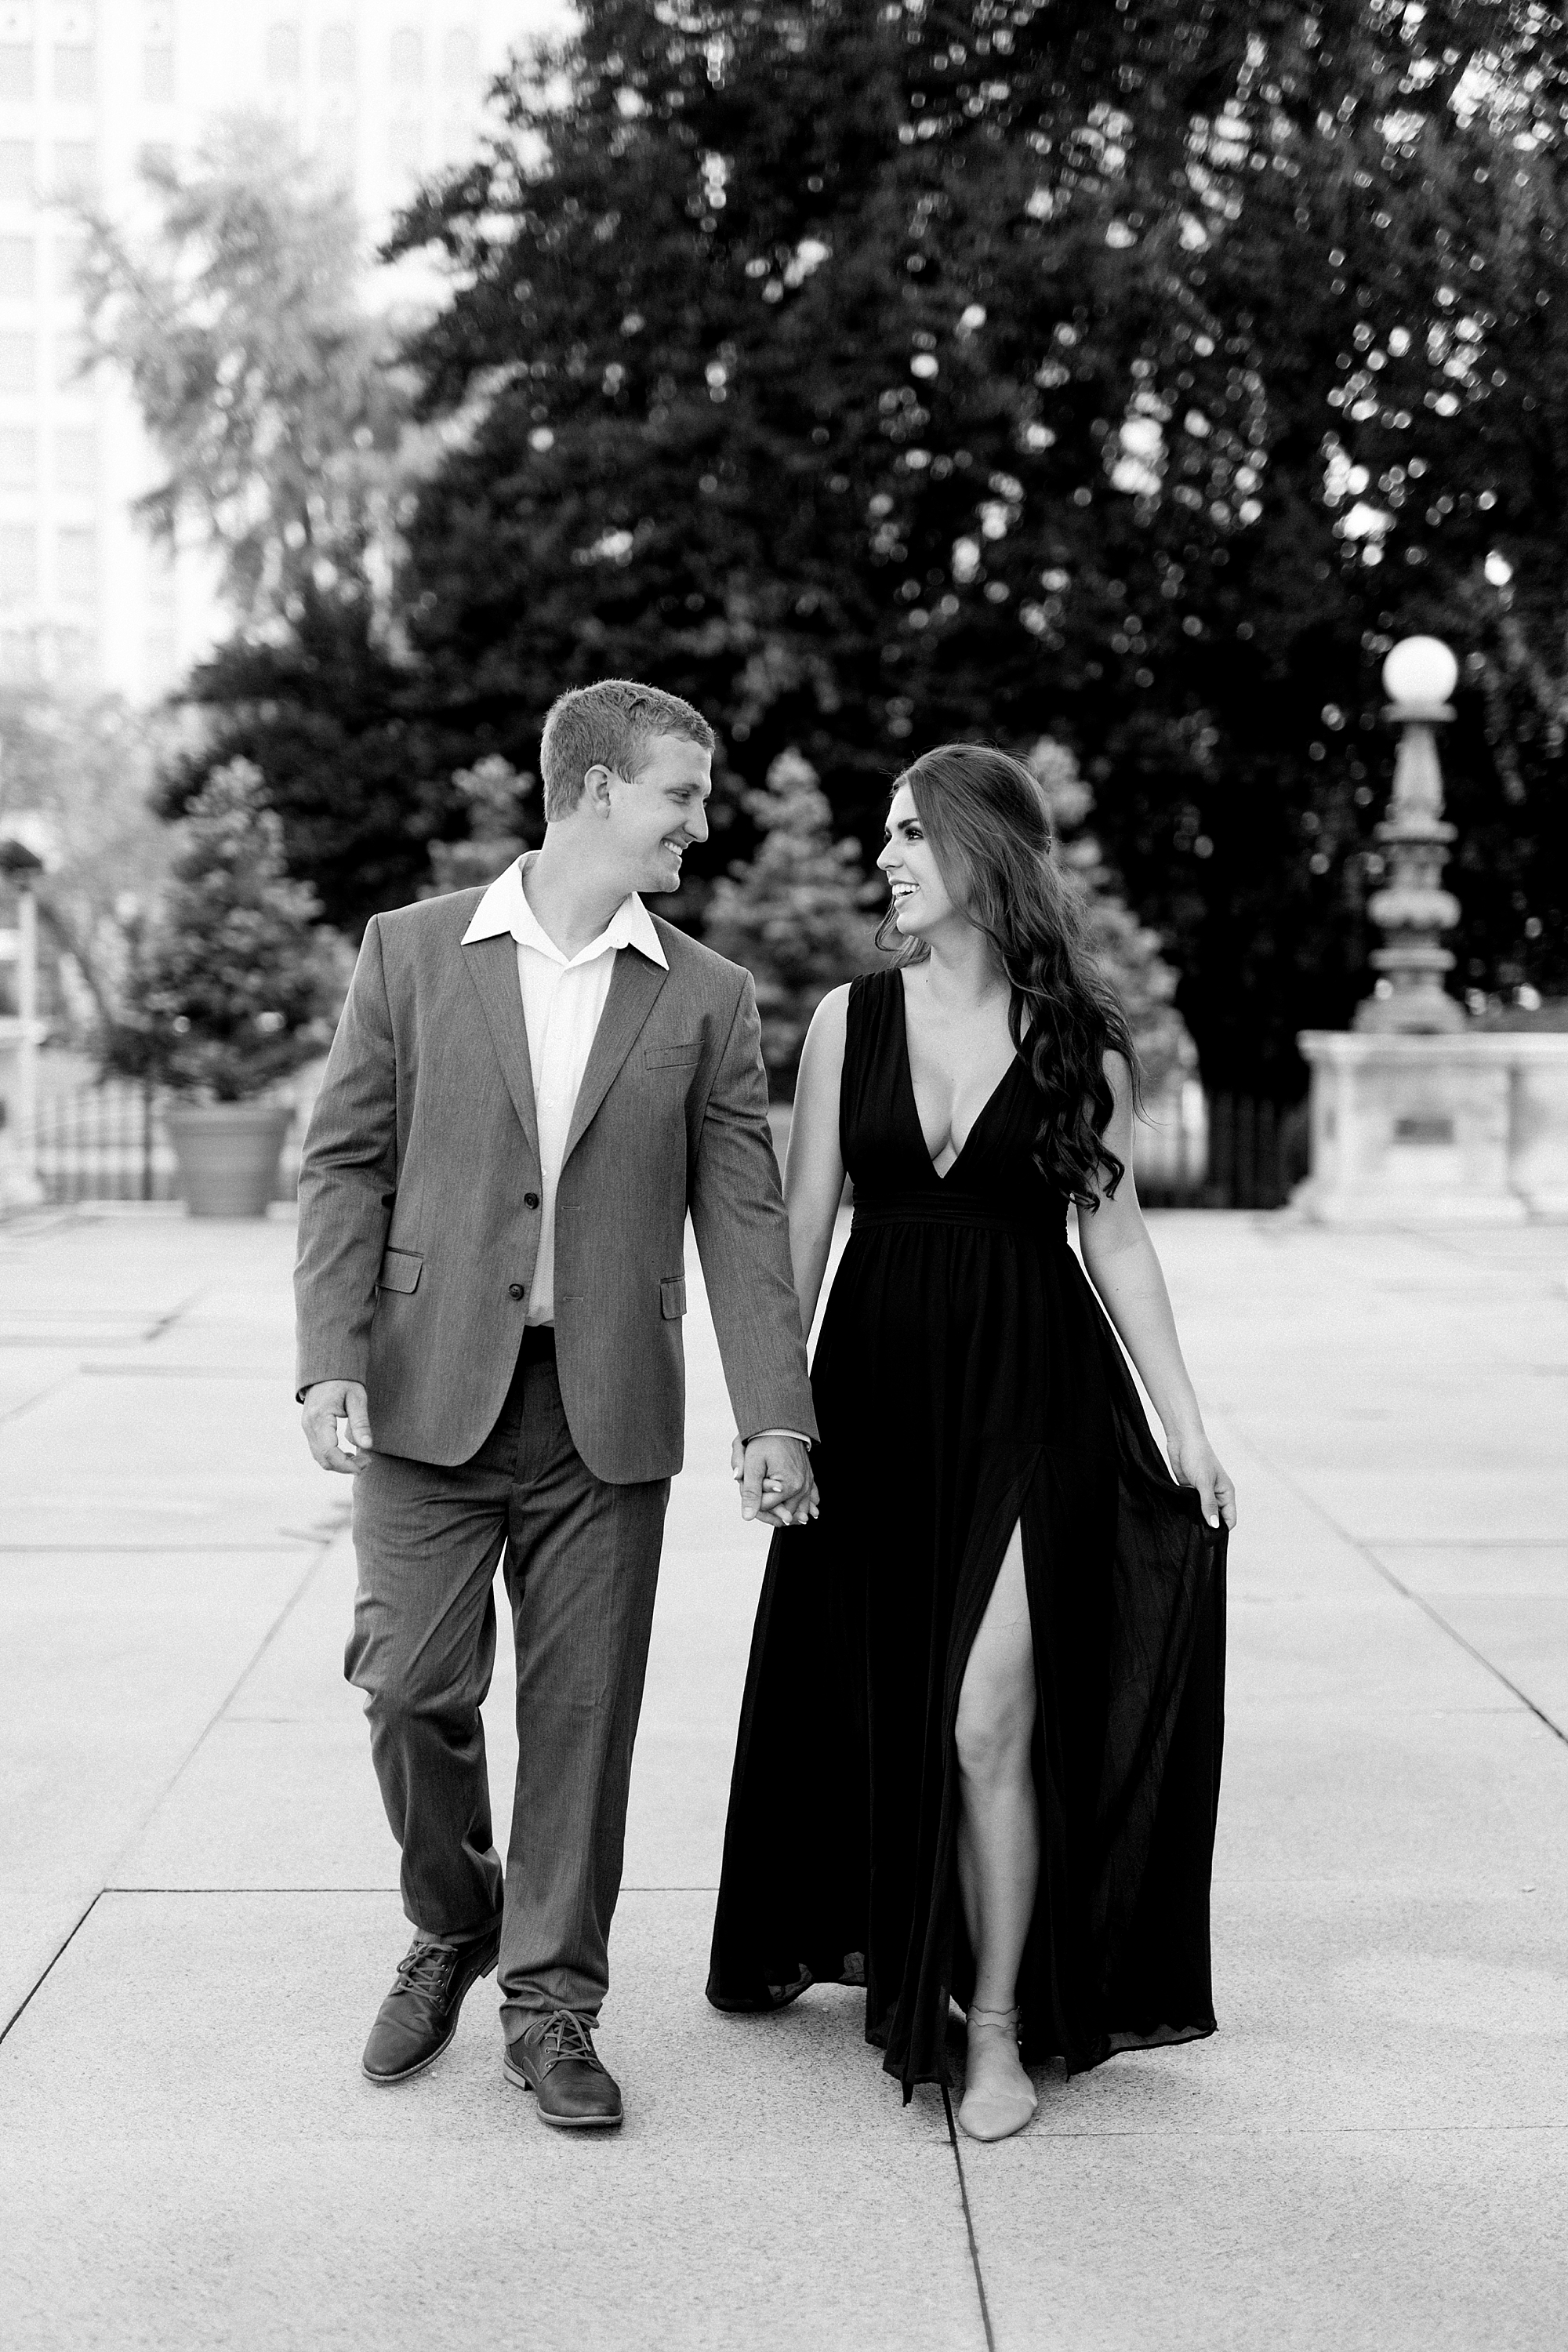 An elegant late summer engagement session at the DIA, Detroit Public Library, and Belle Isle Park in Downtown Detroit, Michigan by Breanne Rochelle Photography.